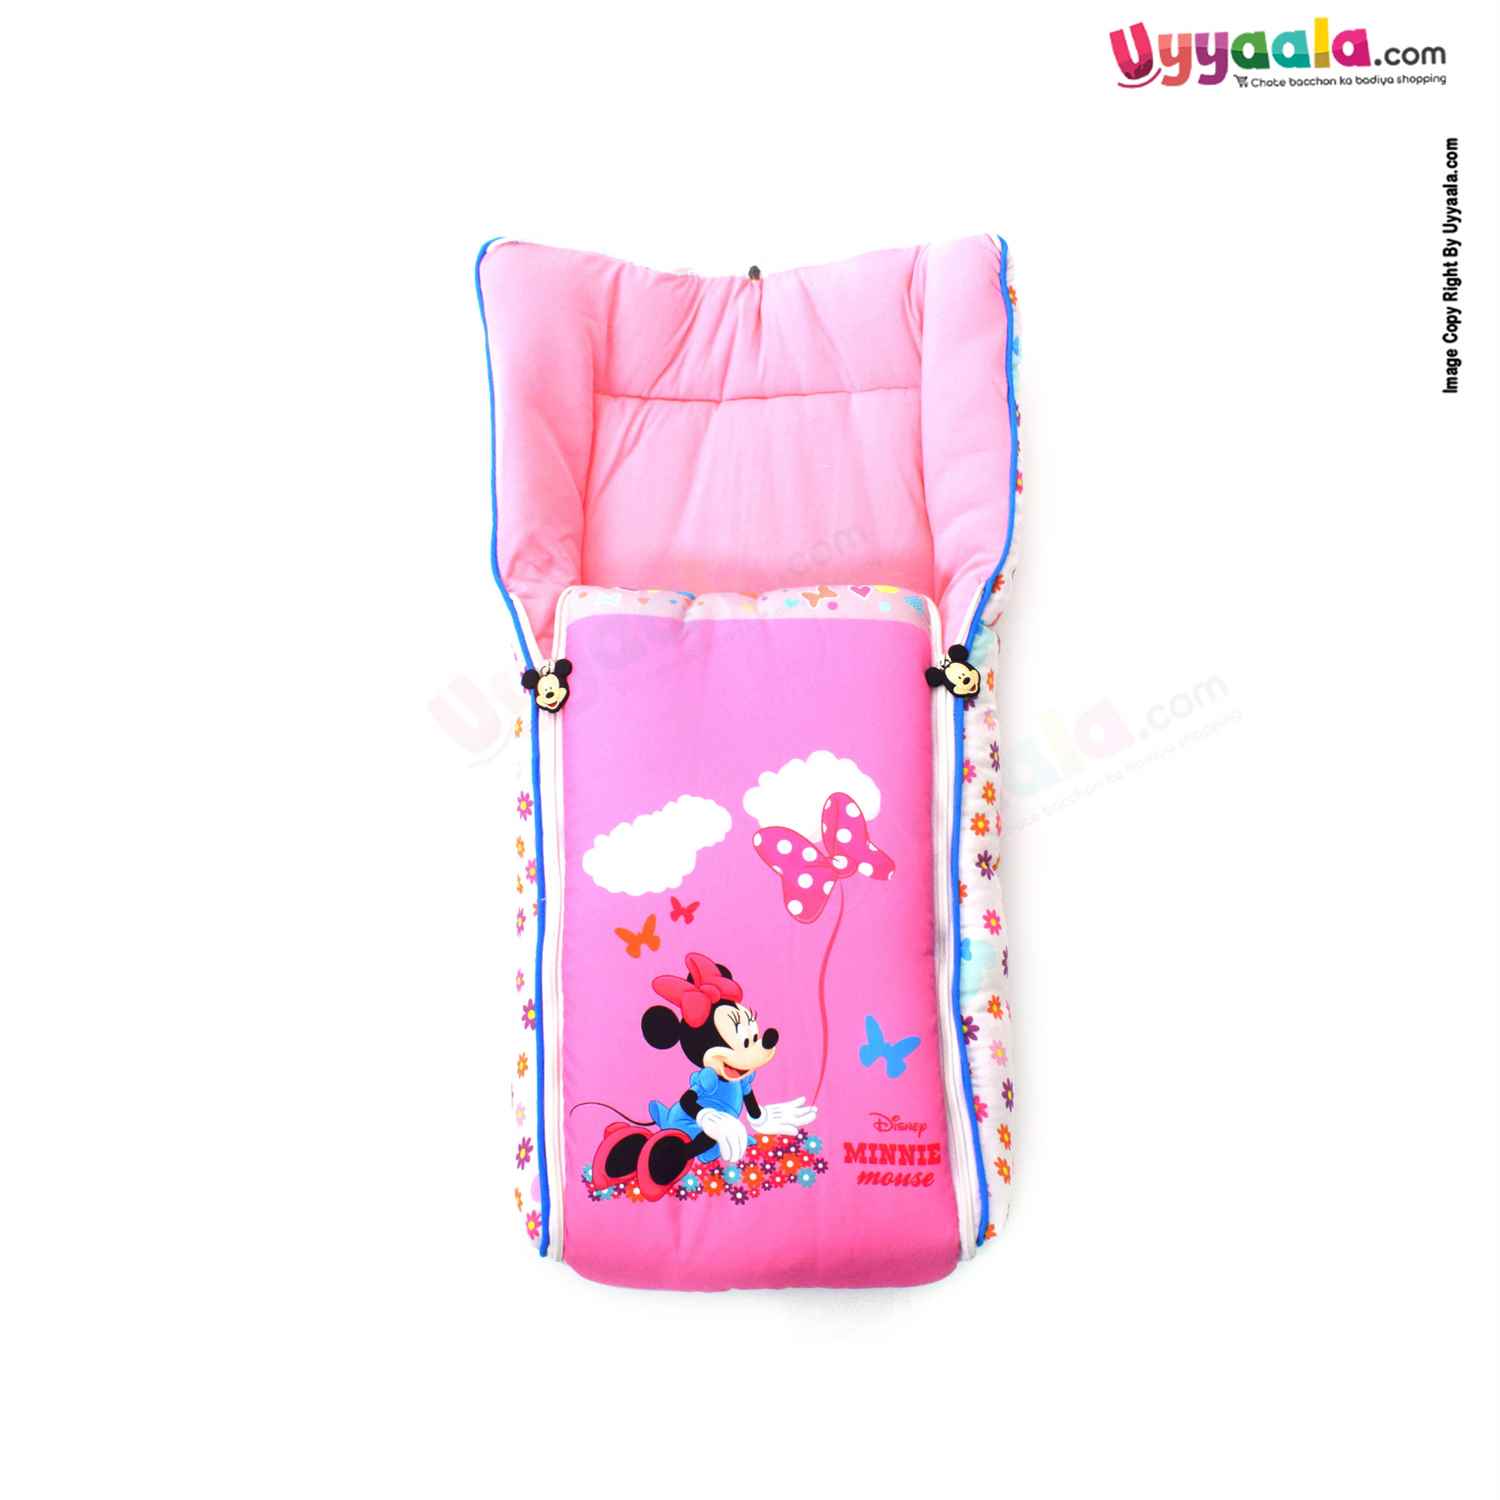 DISNEY Baby Cotton Carry Nest (Sleeping Bag) - Minnie Mouse Print, Pink, 0+m